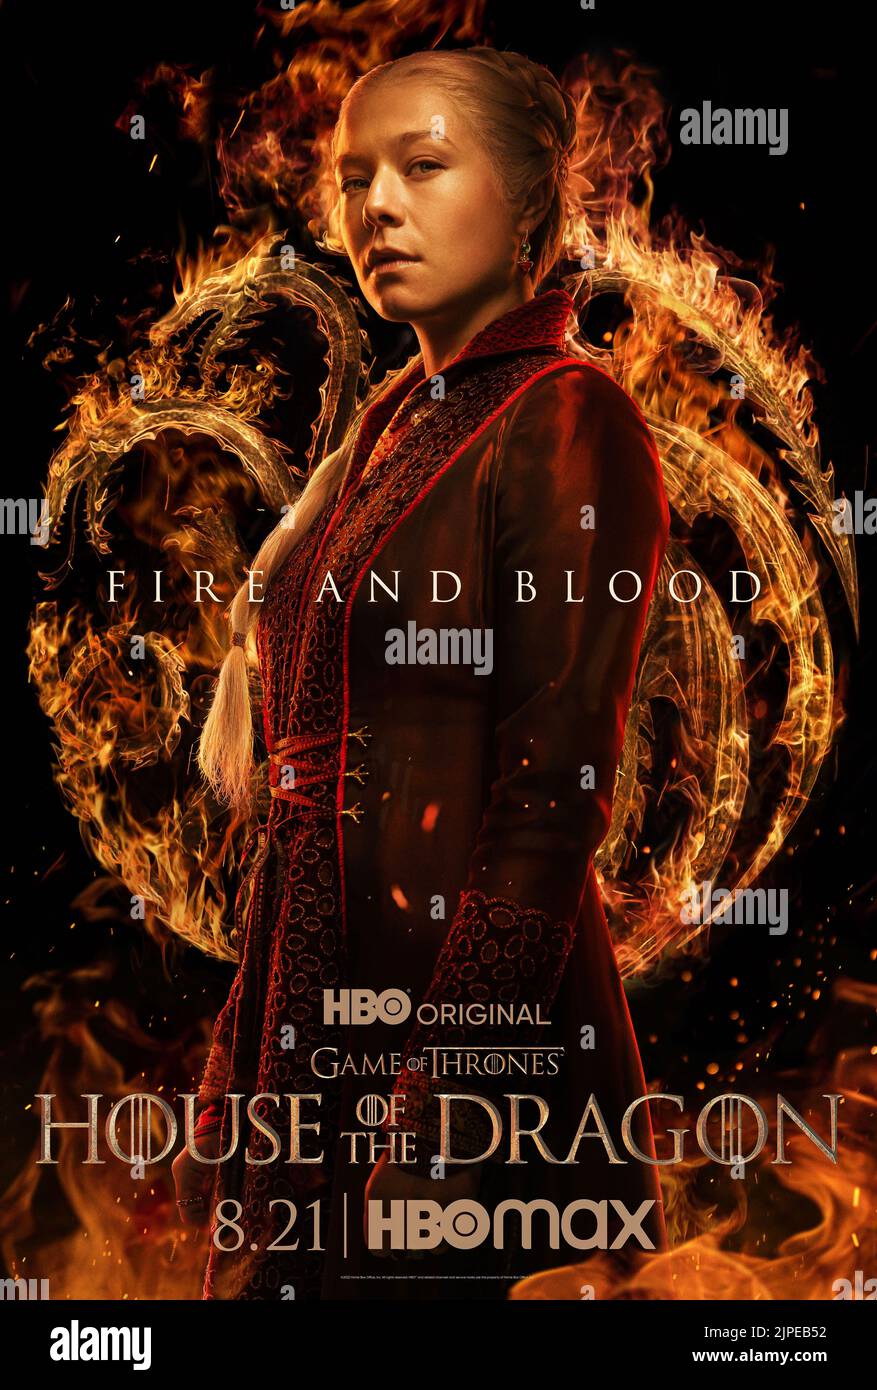 USA. Emma D'Arcy in the (C)HBO new series: House of the Dragon (2022).  Plot: The story of the House Targaryen set 300 years before the events of Game of Thrones (2011).  Ref: LMK106-J8255-150822 Supplied by LMKMEDIA. Editorial Only. Landmark Media is not the copyright owner of these Film or TV stills but provides a service only for recognised Media outlets. pictures@lmkmedia.com Stock Photo